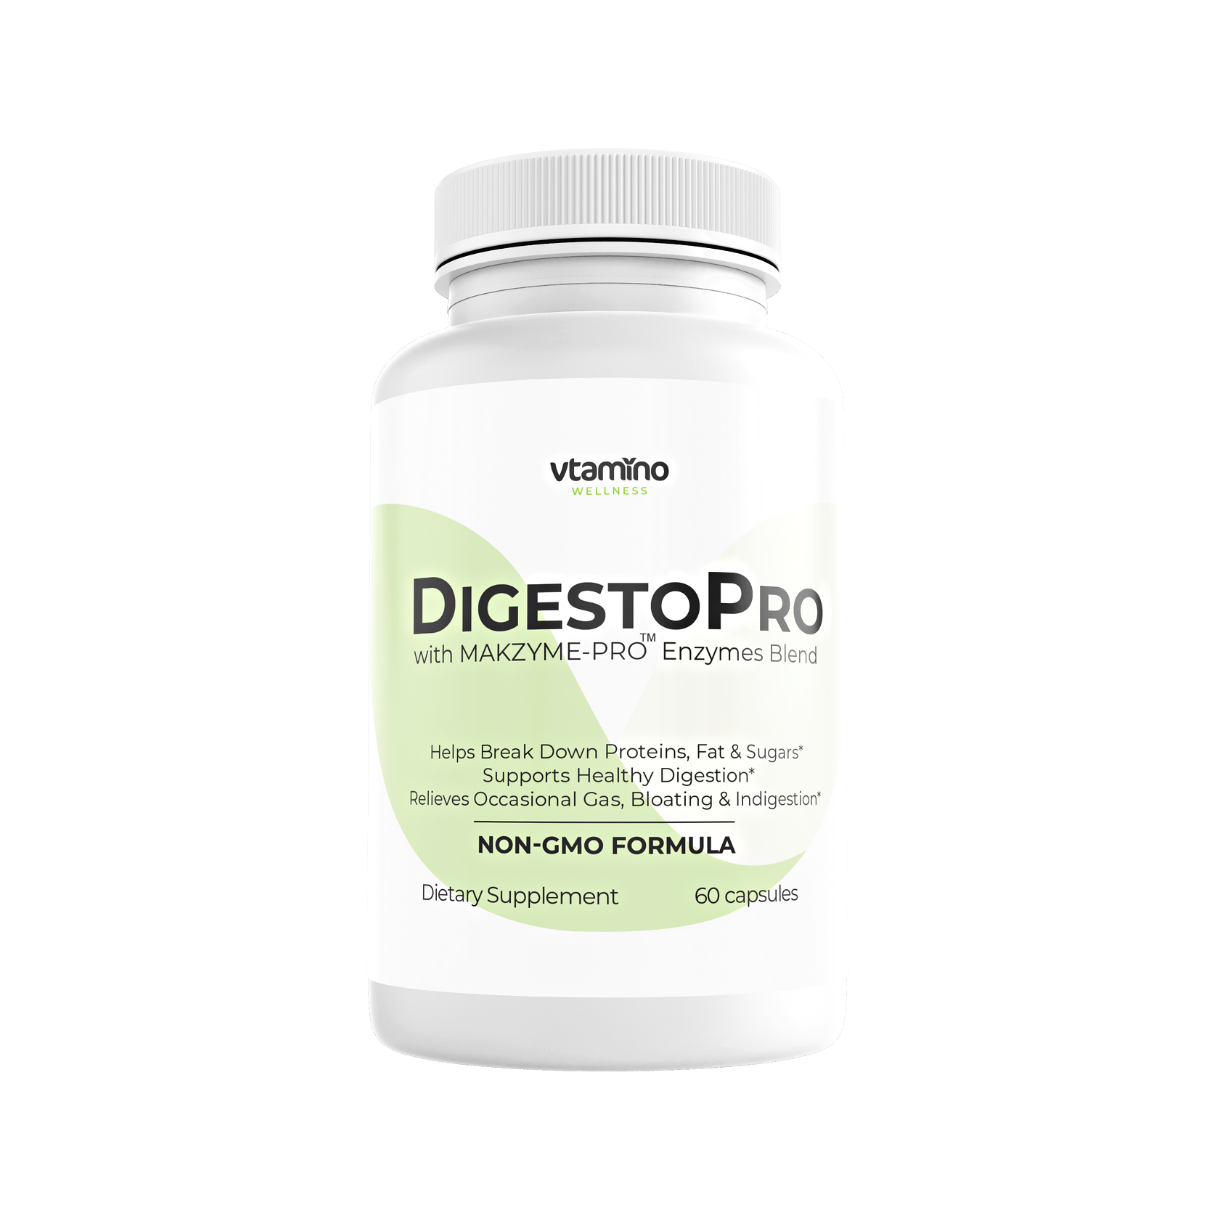 vtamino DigestoPro – with MAKZYME-PRO Enzymes Blend (30 Days Supply)